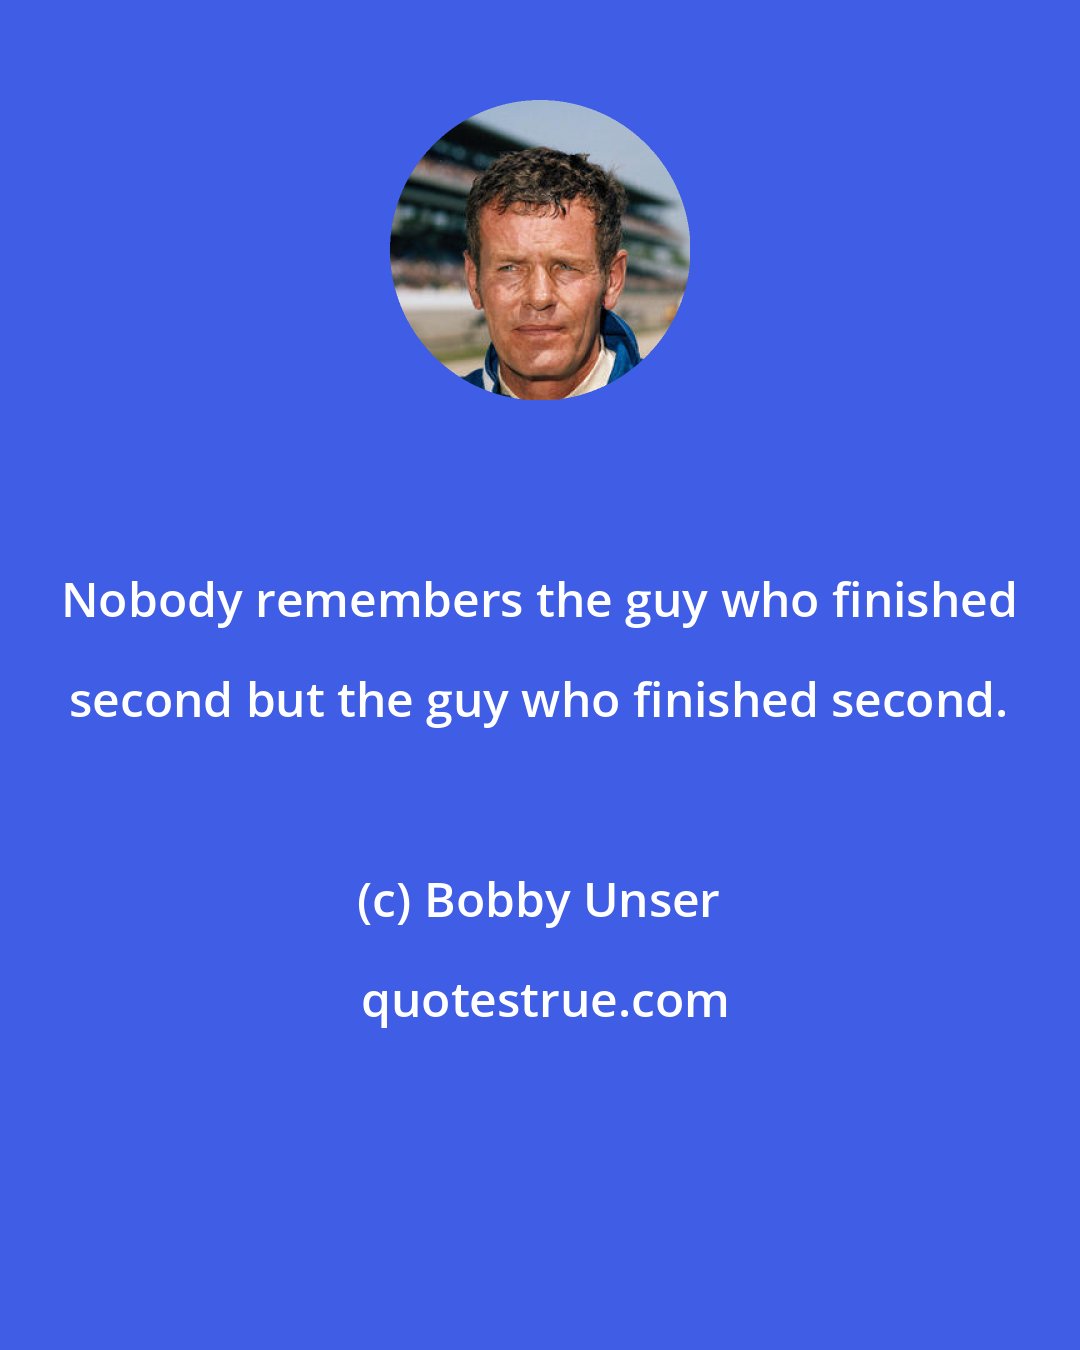 Bobby Unser: Nobody remembers the guy who finished second but the guy who finished second.